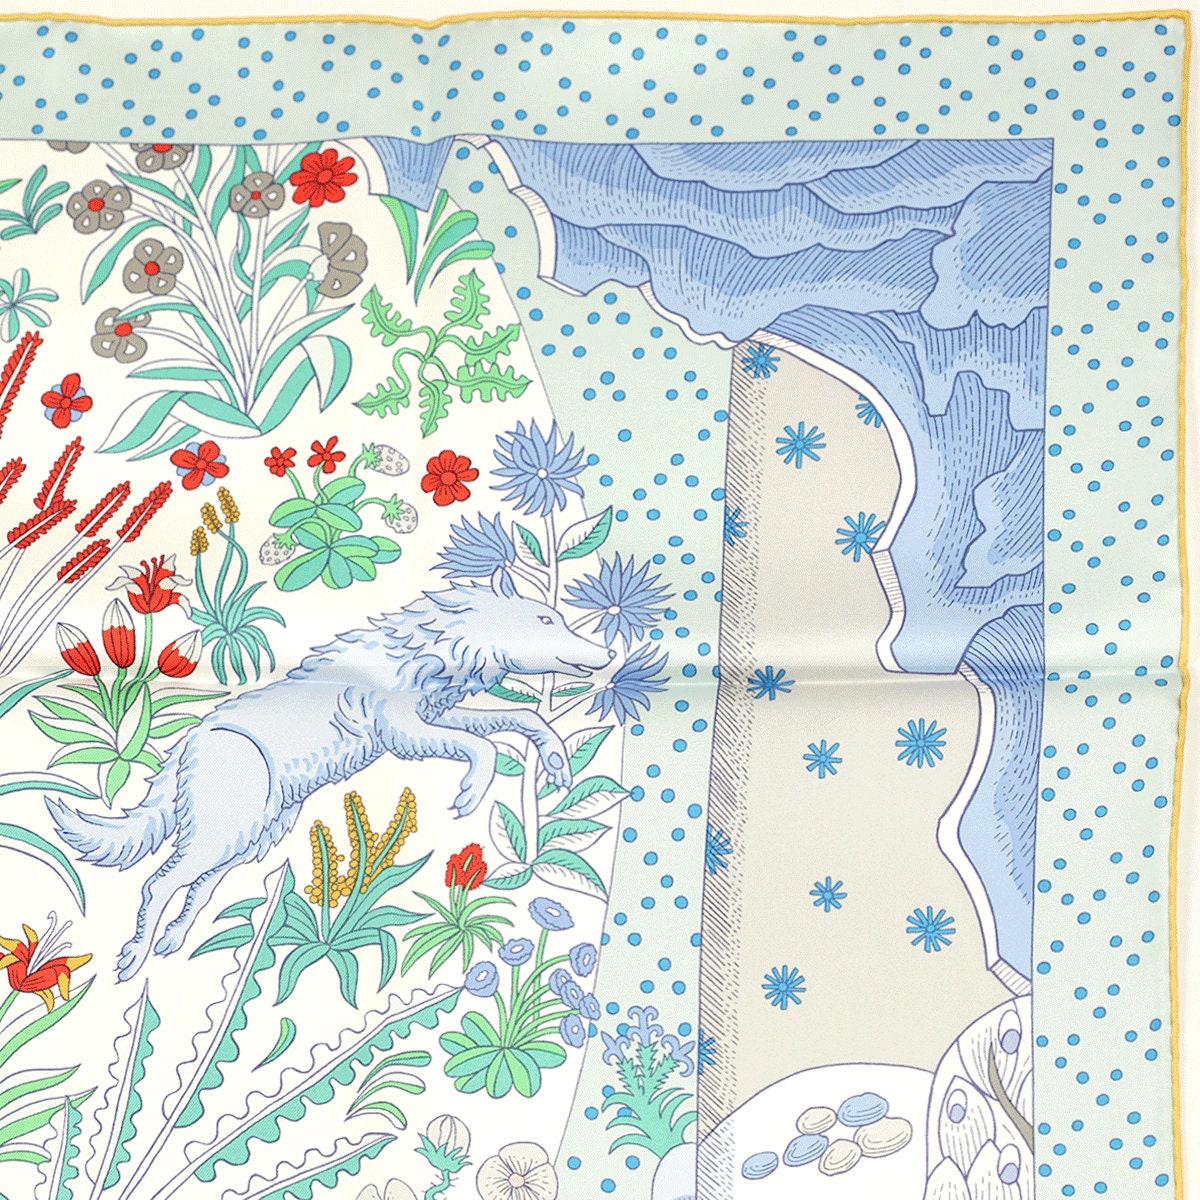 Hermes Scarf "Le Premier Chant" by Sophia Andreotti and Édouard Baribeaud 90cm Silk | Carre Foulard